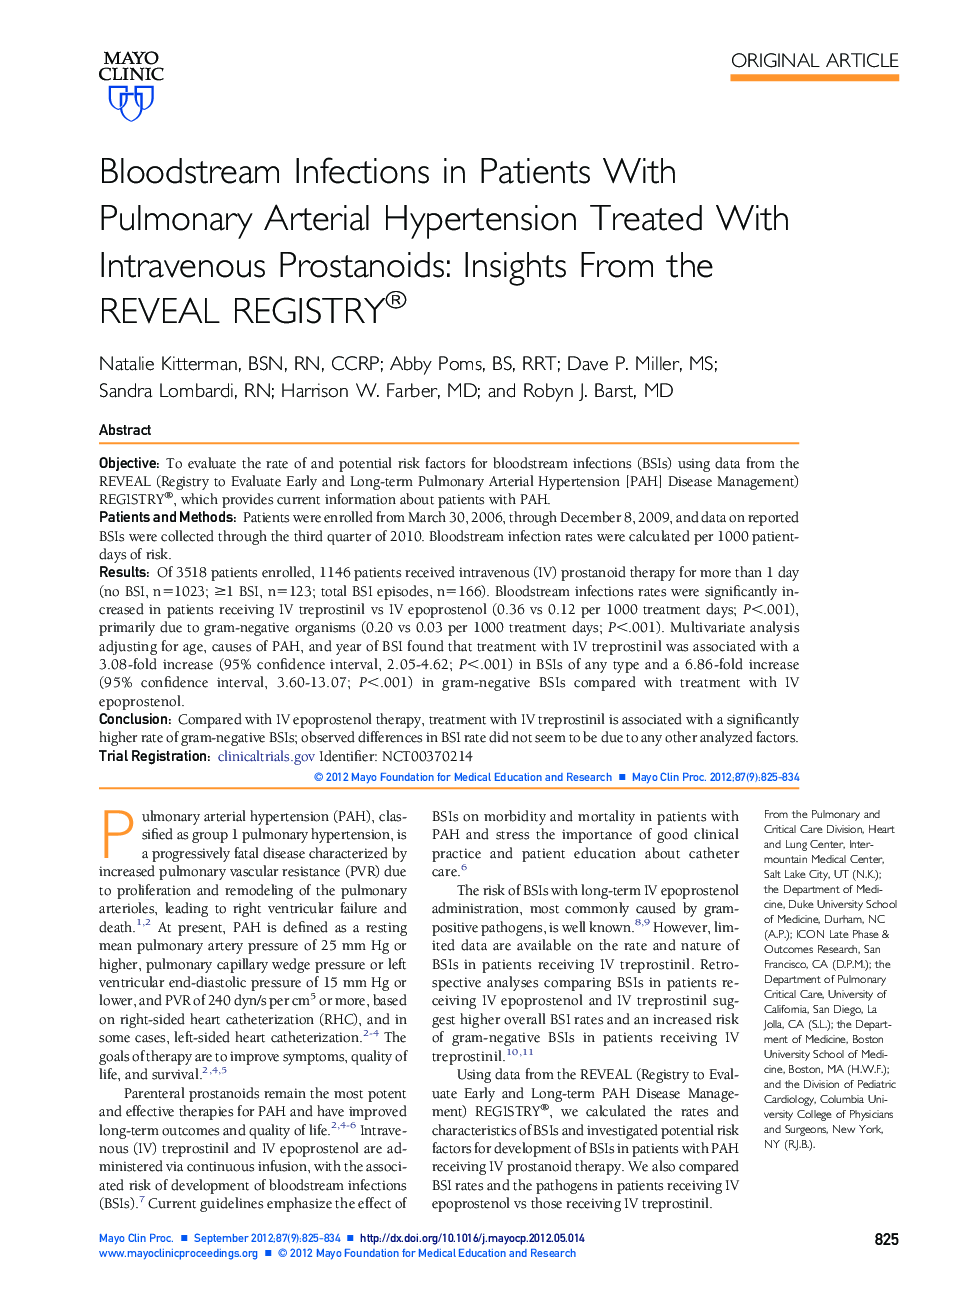 Bloodstream Infections in Patients With Pulmonary Arterial Hypertension Treated With Intravenous Prostanoids: Insights From the REVEAL REGISTRY®